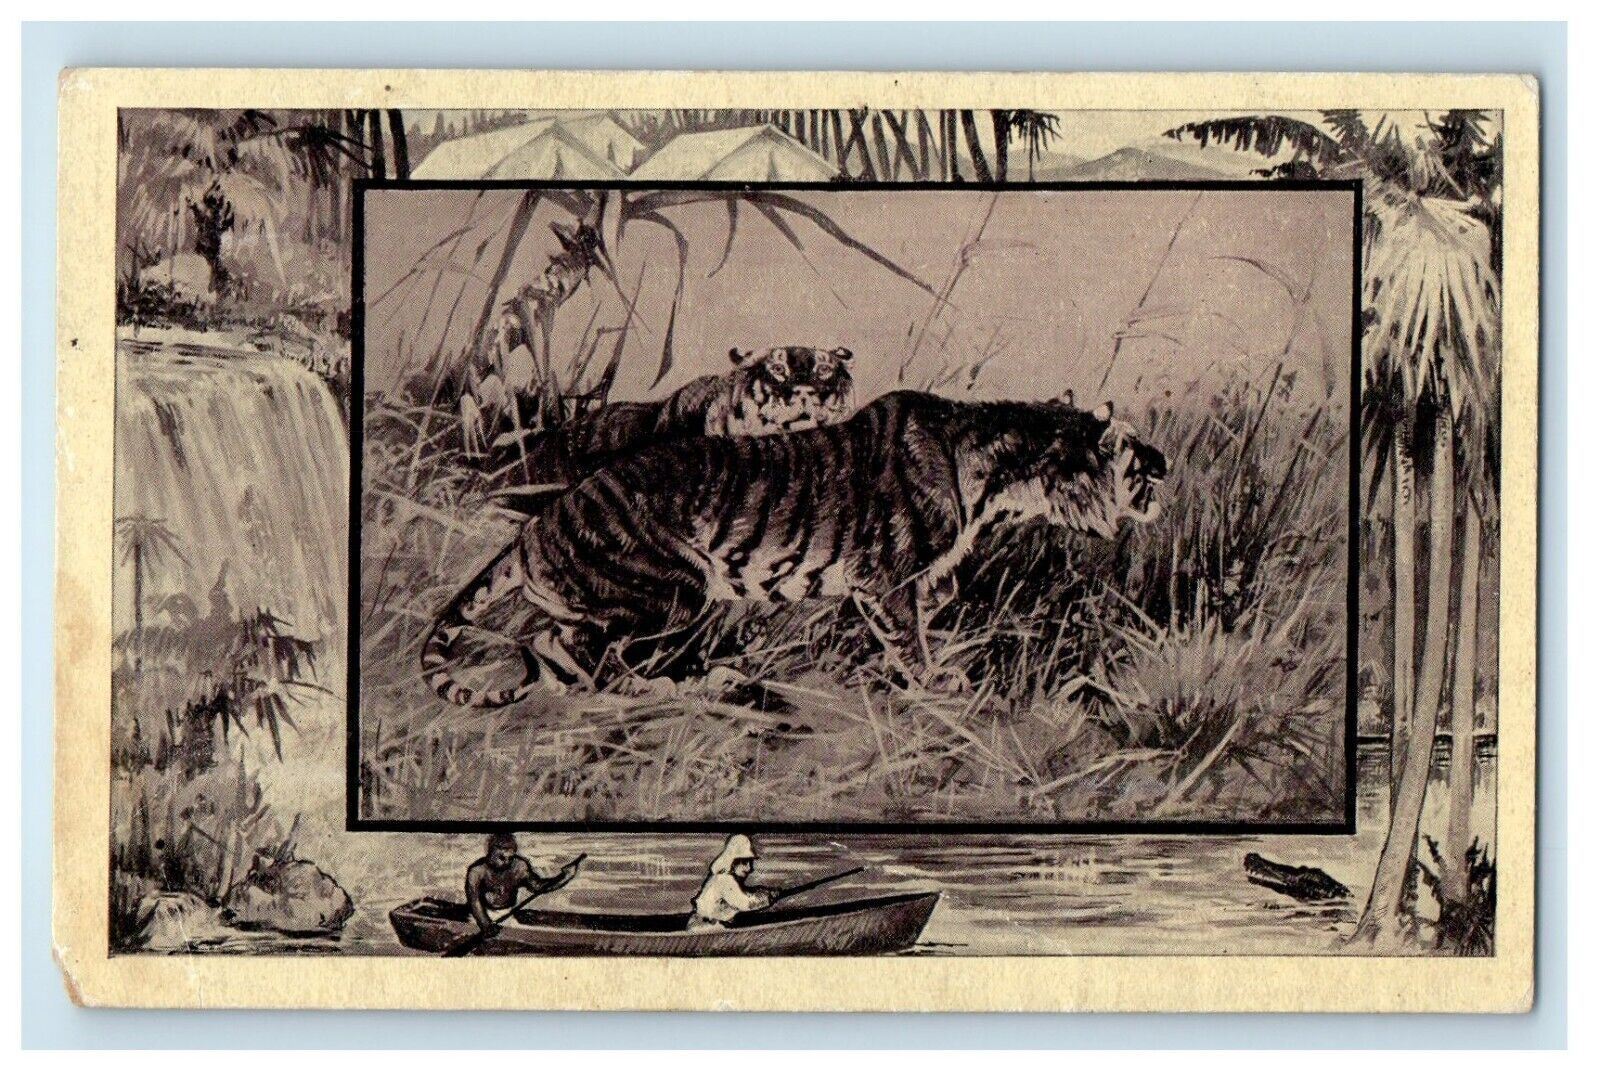 c1930's African Tiger Zoo Art Hunting Canoe Chicago Illinois IL Vintage Postcard